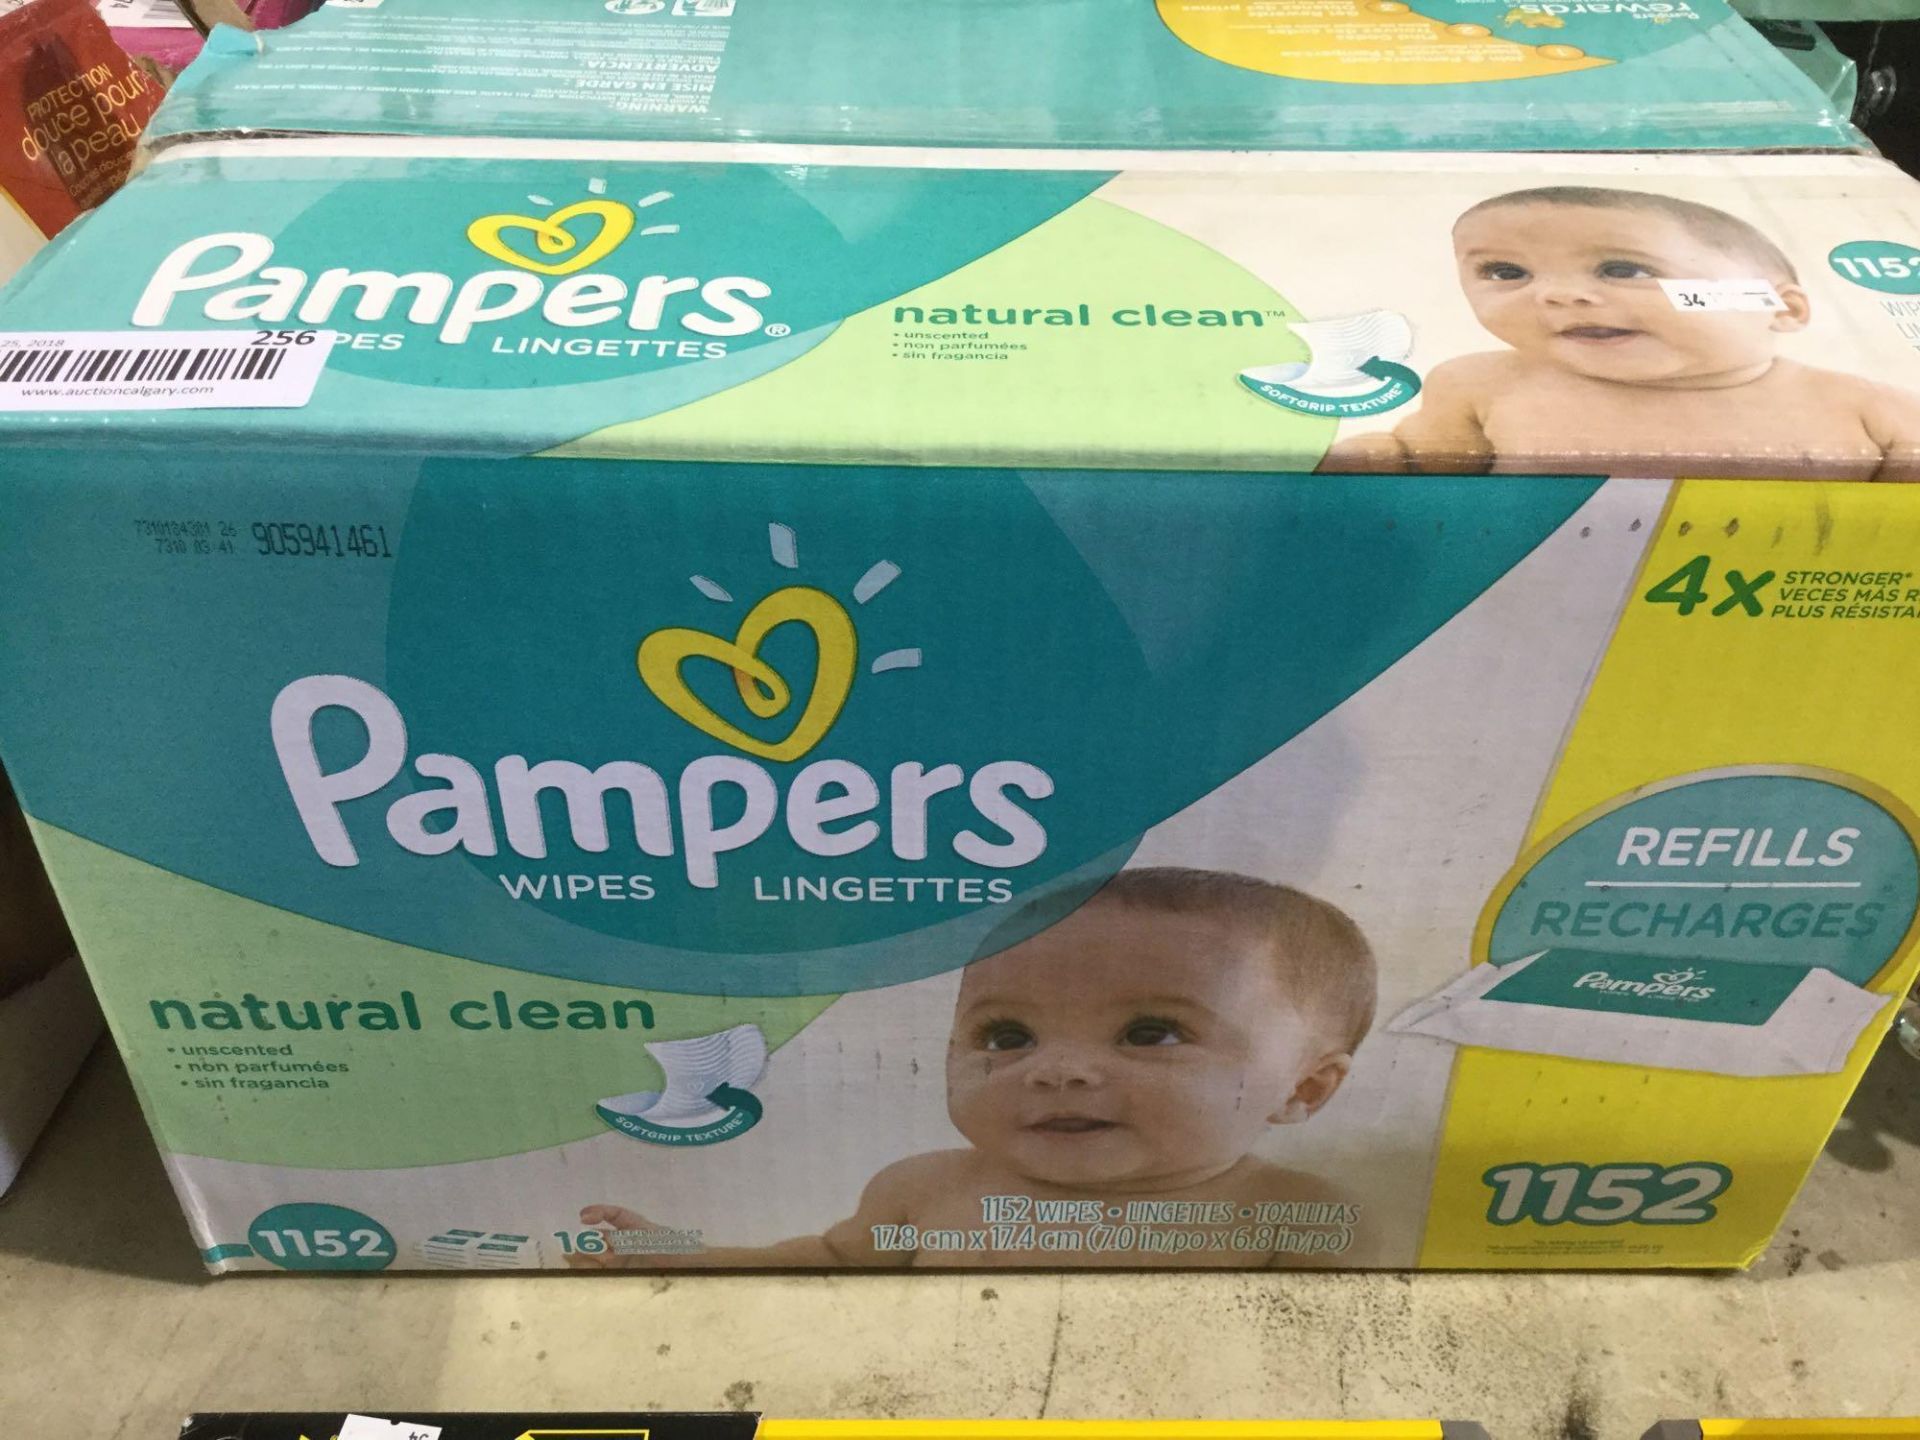 Pampers Natural Clean 1152 Wipes